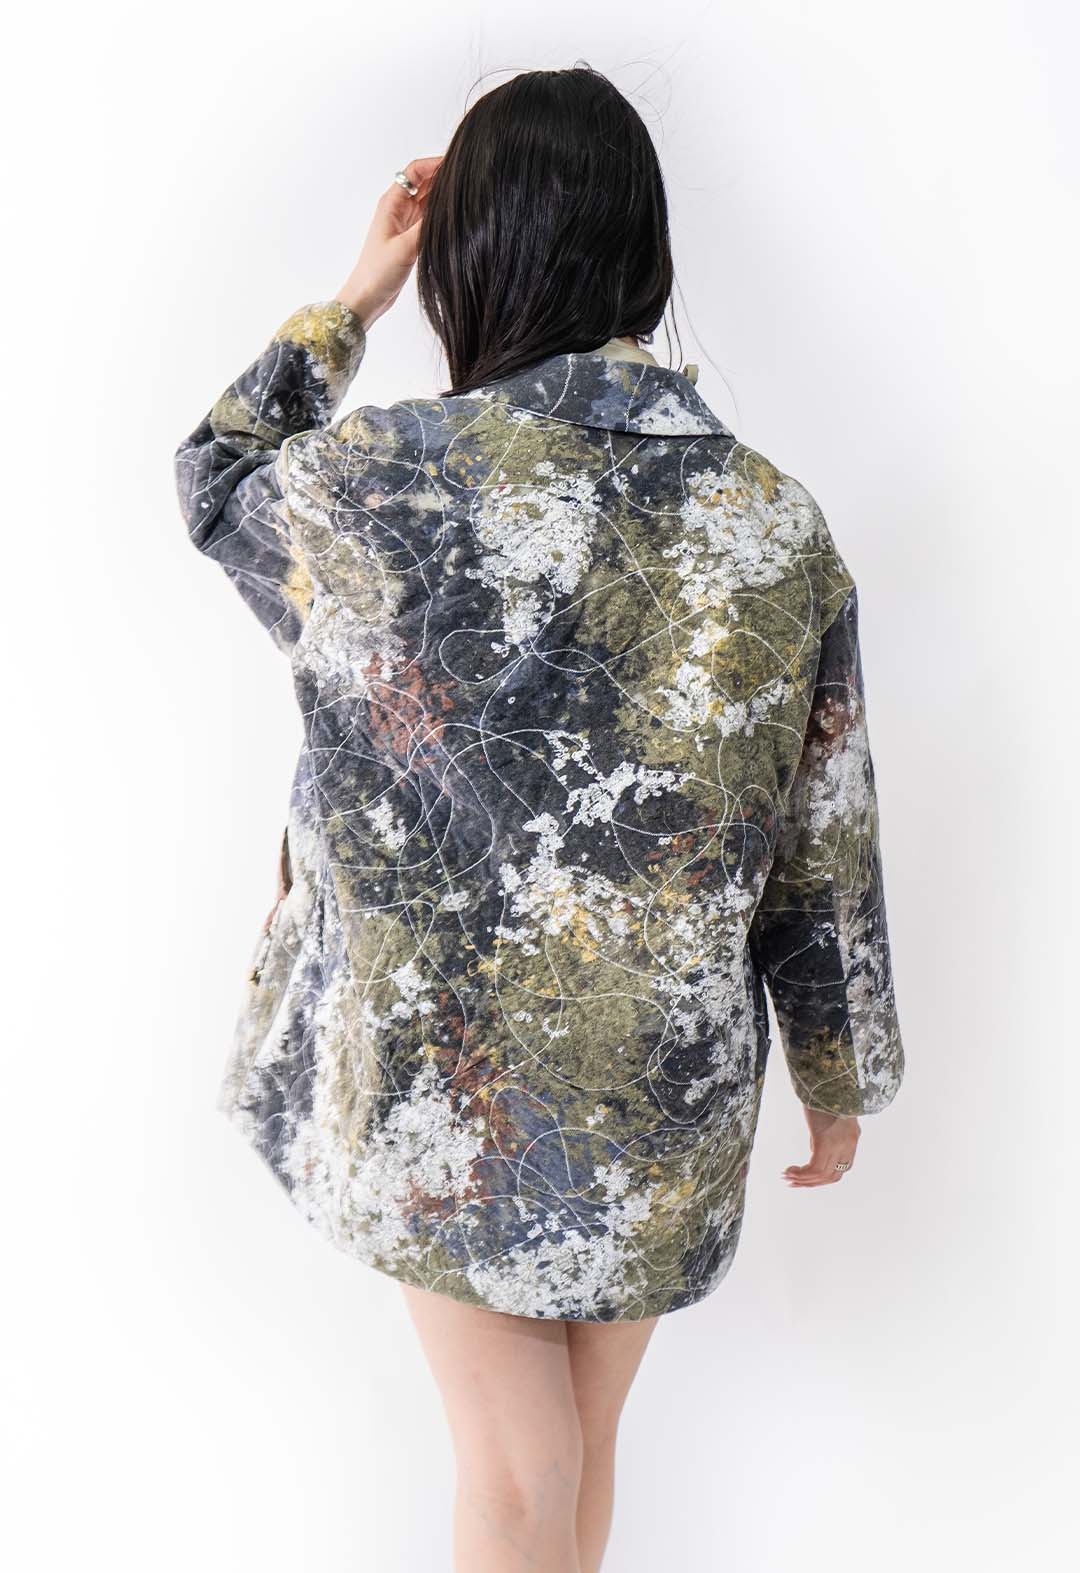 This is a back view of a jacket that is made from chopped-up scrap fabric, all stitched together with white thread and a small zigzag stitch to create a colorful abstract pattern of whites, blues, greens, and burnt orange. The jacket has a straight boxy shape. The model is standing in front of a white background. Her hair is pulled forward to one side, and she has one hand running through it while her other hand falls straight by her side.